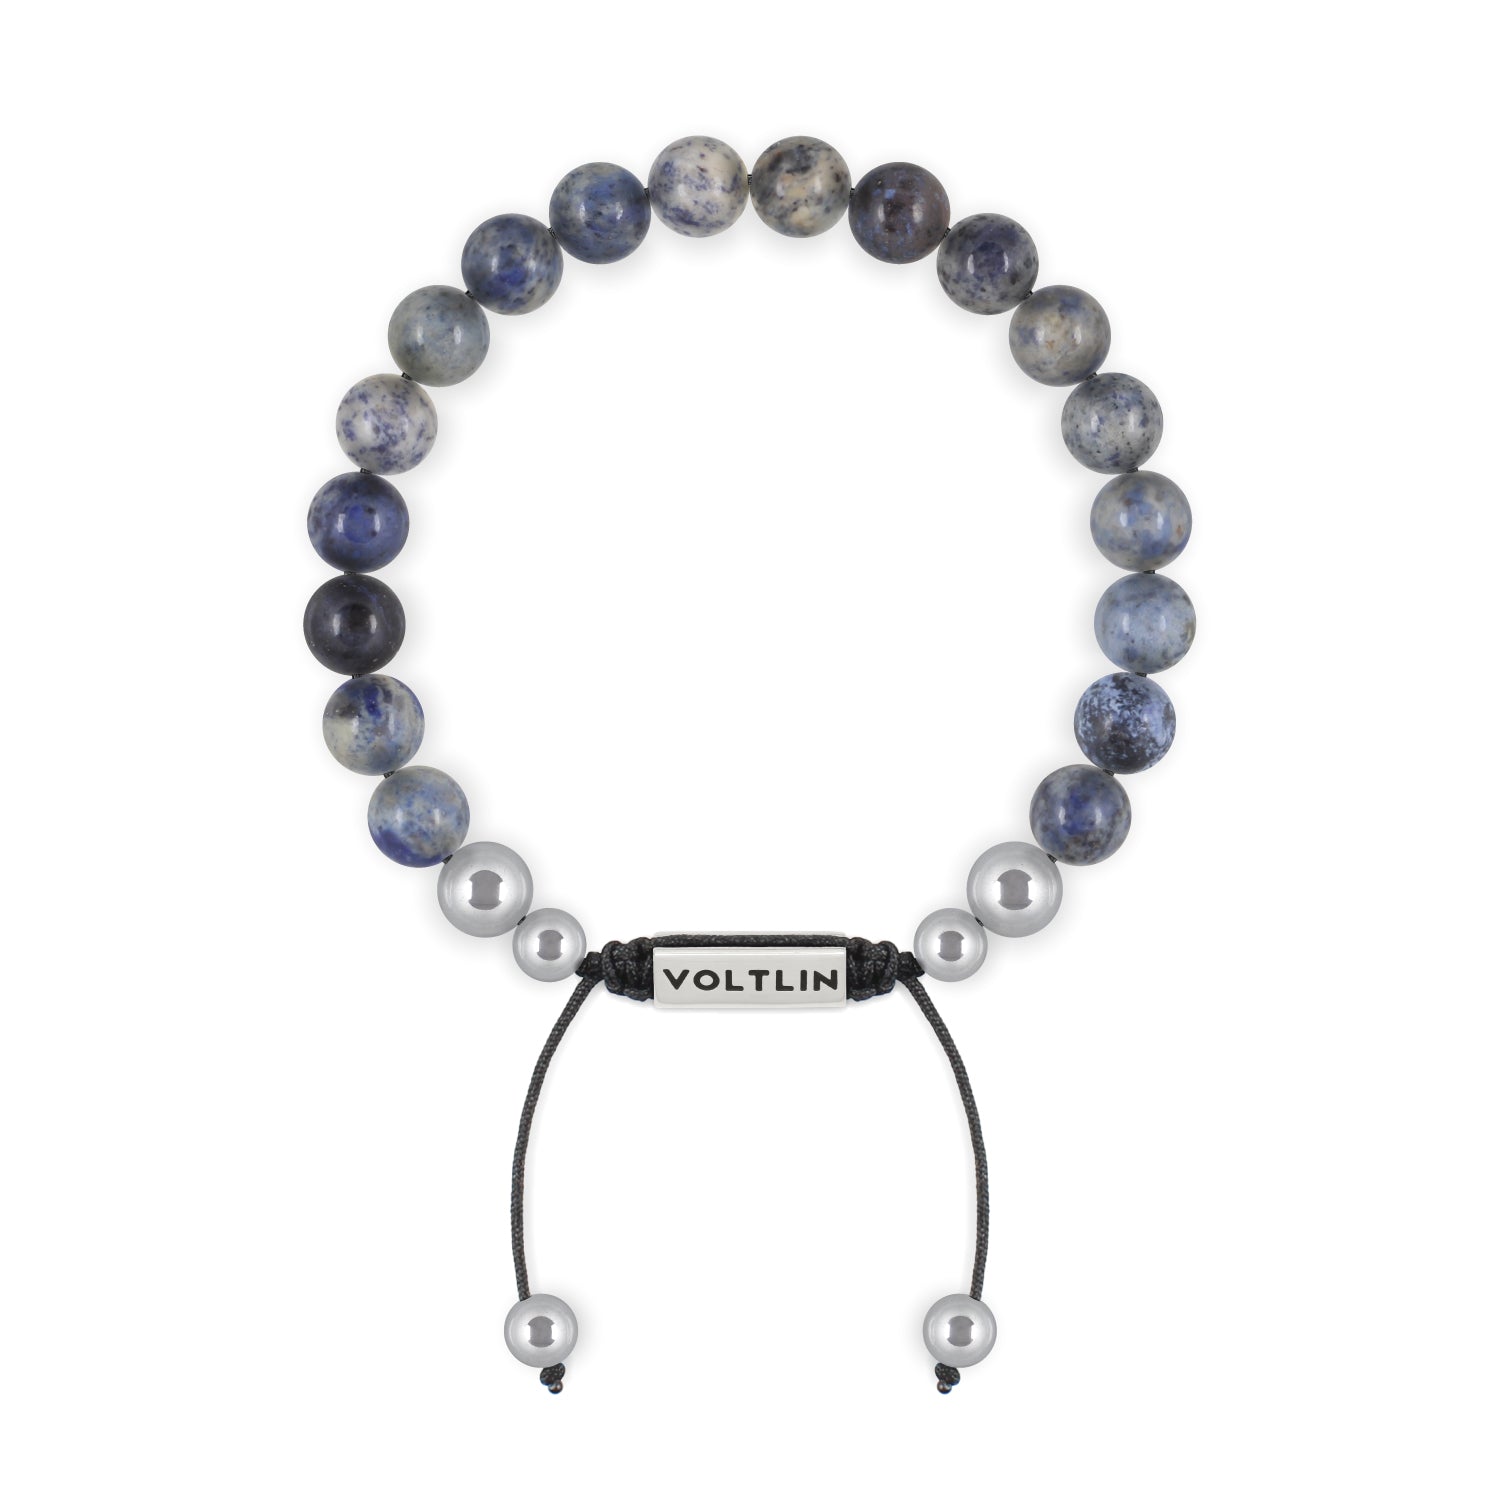 Front view of an 8mm Dumortierite beaded shamballa bracelet with silver stainless steel logo bead made by Voltlin